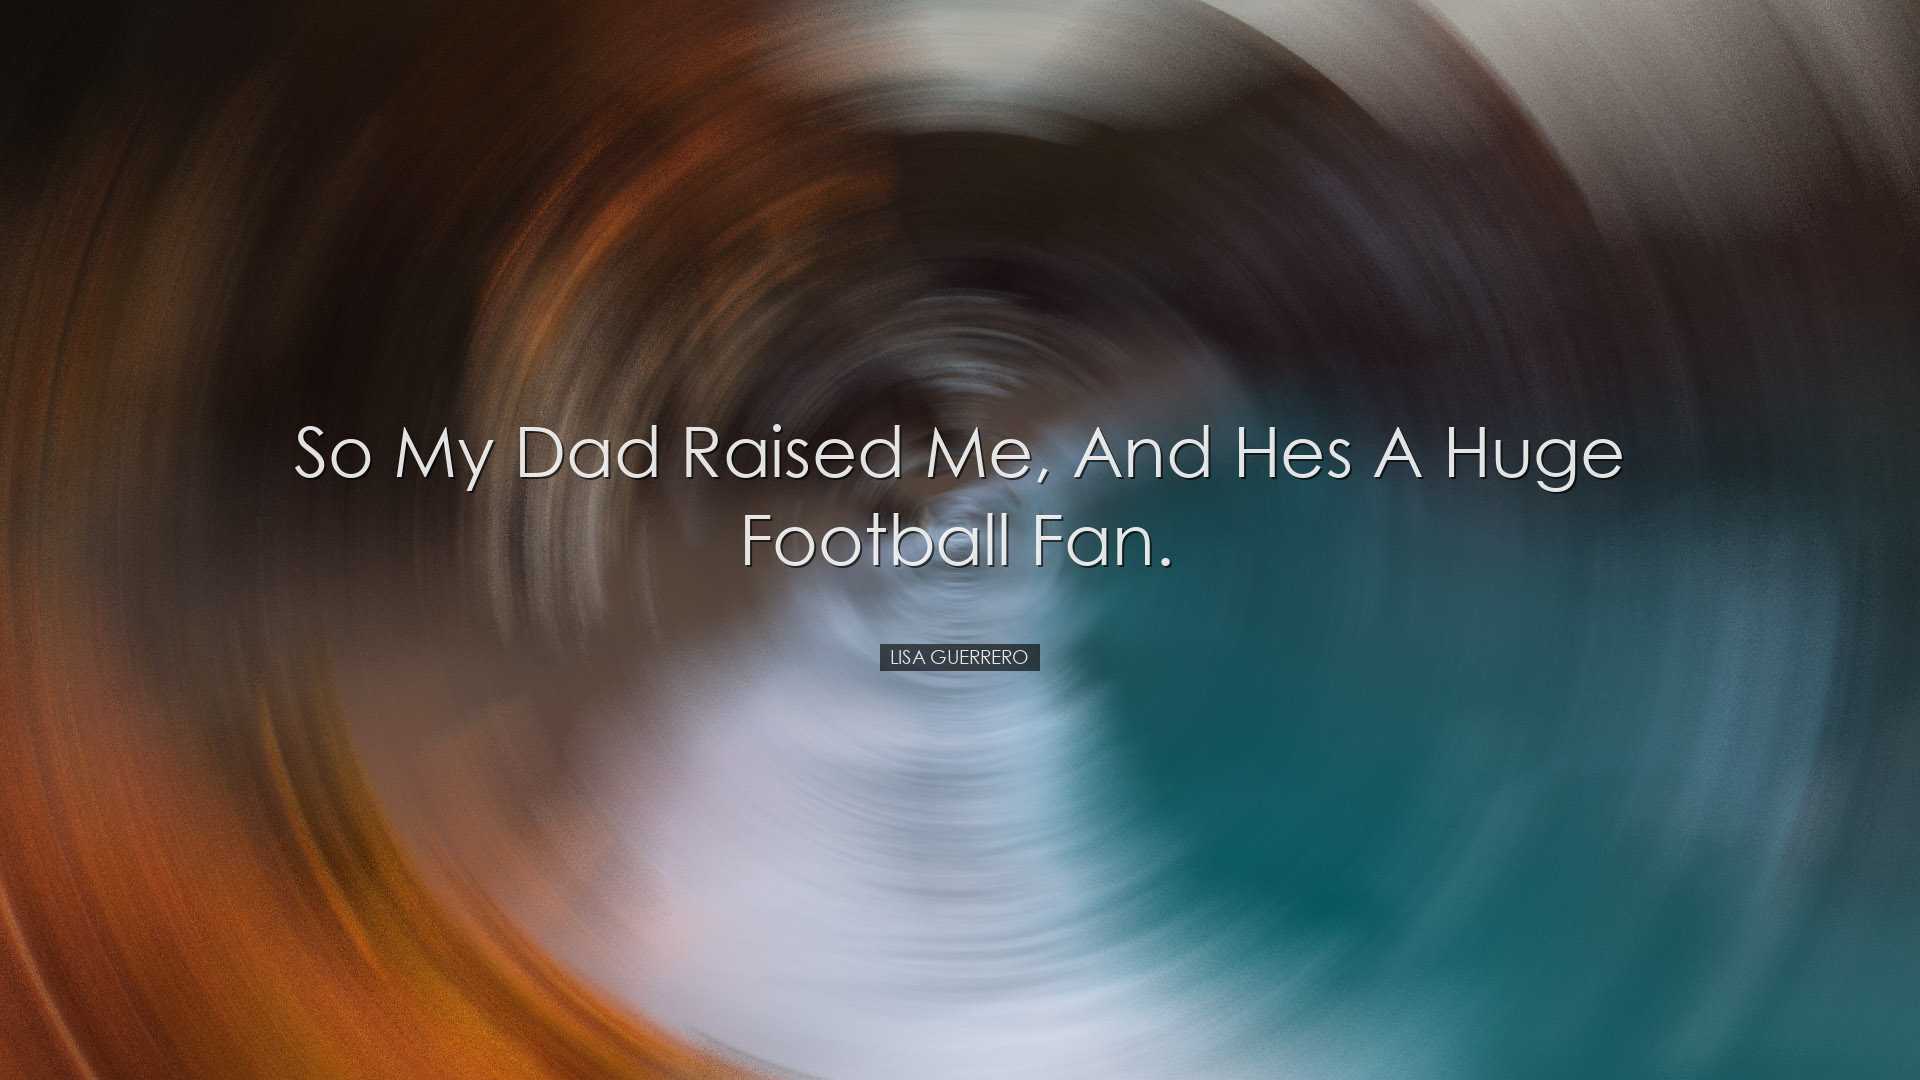 So my dad raised me, and hes a huge football fan. - Lisa Guerrero